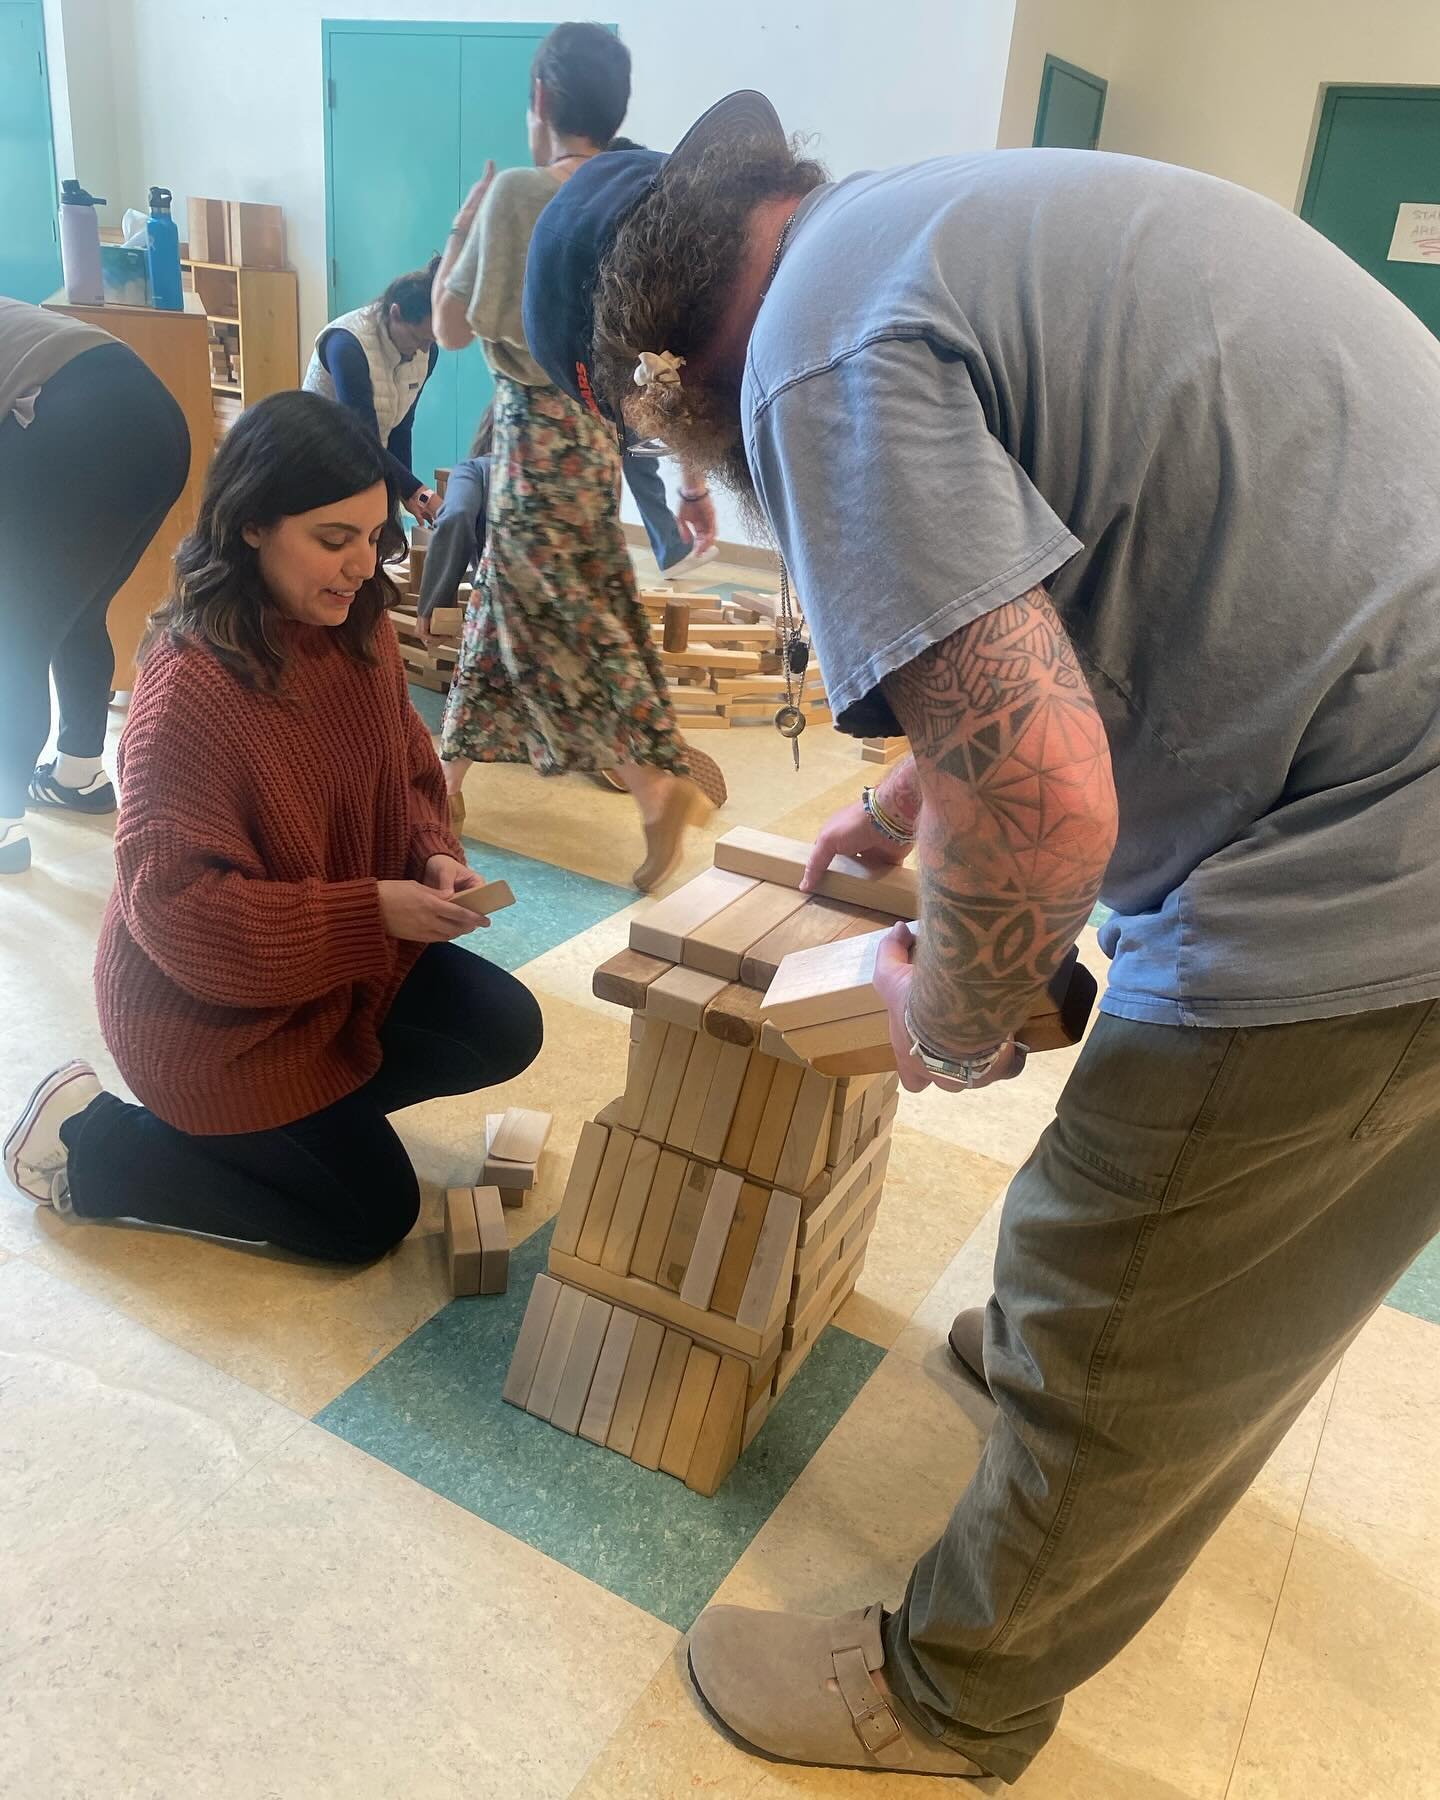 After generating a list of values connected to Westland&rsquo;s upcoming 75th anniversary, the staff &ldquo;built&rdquo; these values through block building. The concepts of community, collaboration, critical thinking, hands-on learning, parent invol